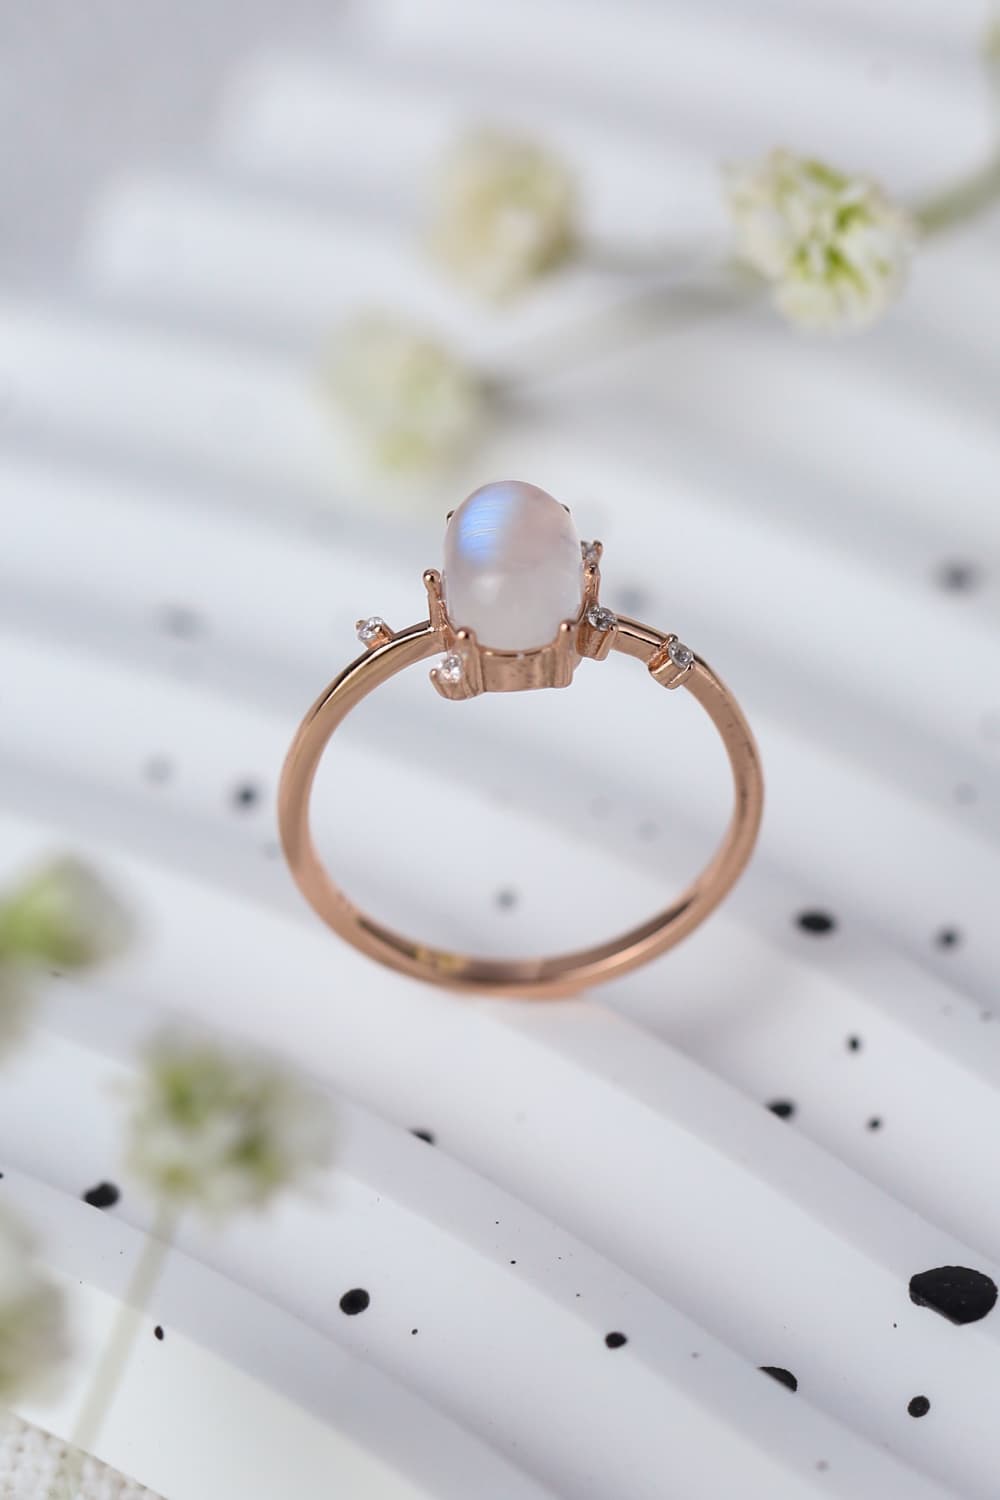 Light Gray High Quality Natural Moonstone 925 Sterling Silver Ring